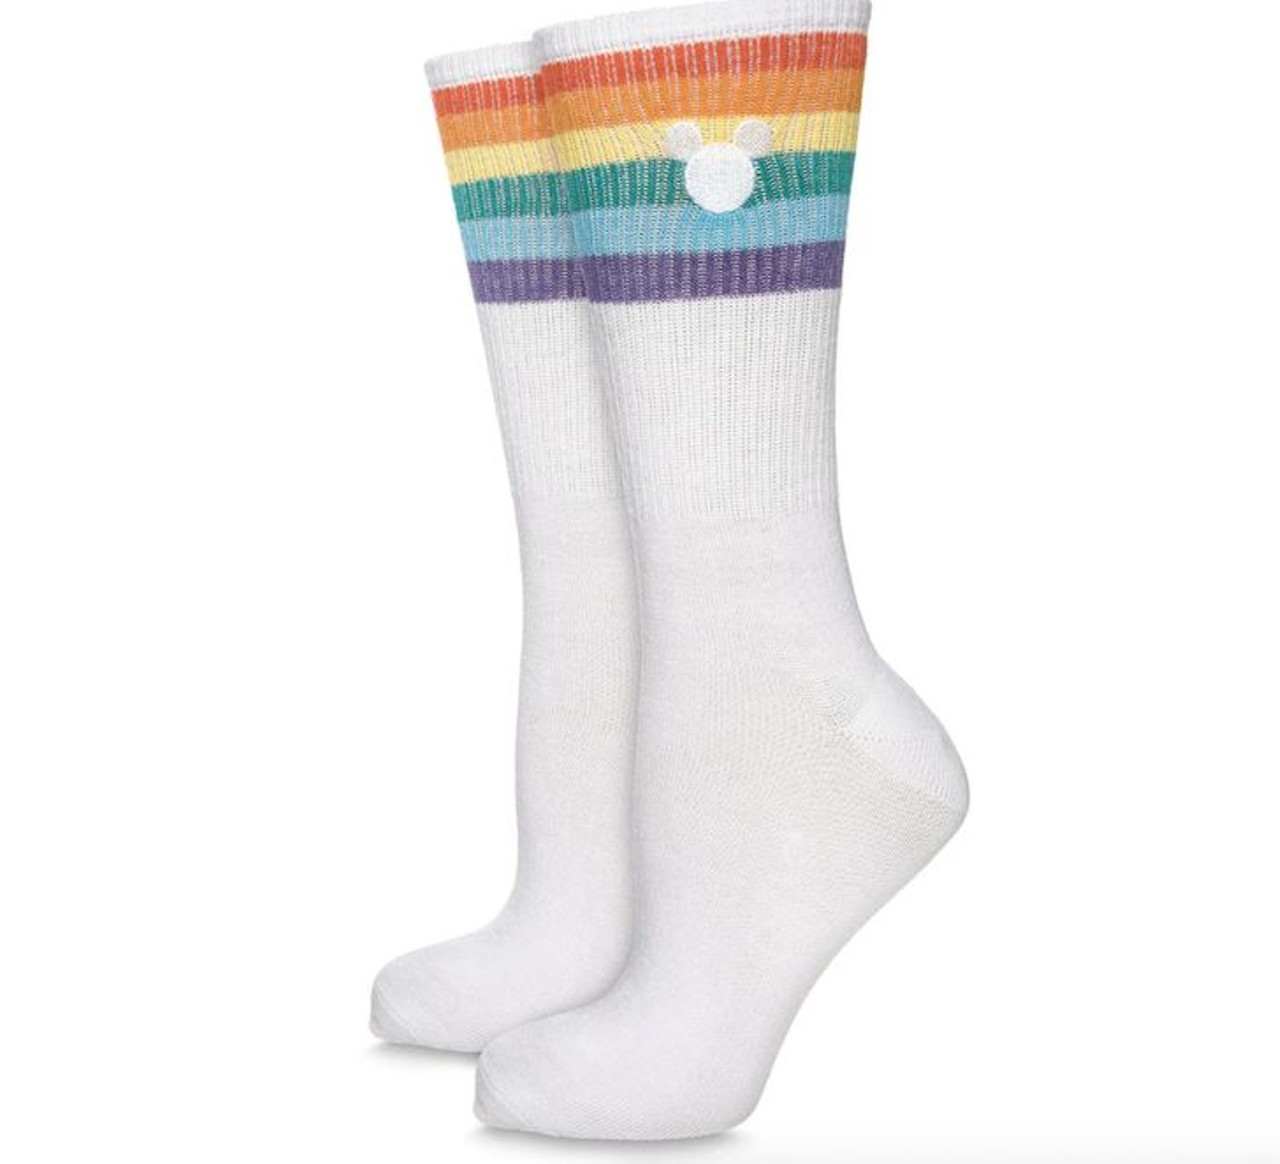 Mickey Mouse Knee Socks
White knee-high socks complete any look with yarn dye rainbow stripes and embroidered Mickey icons for $6.95.
Photo via shopDisney